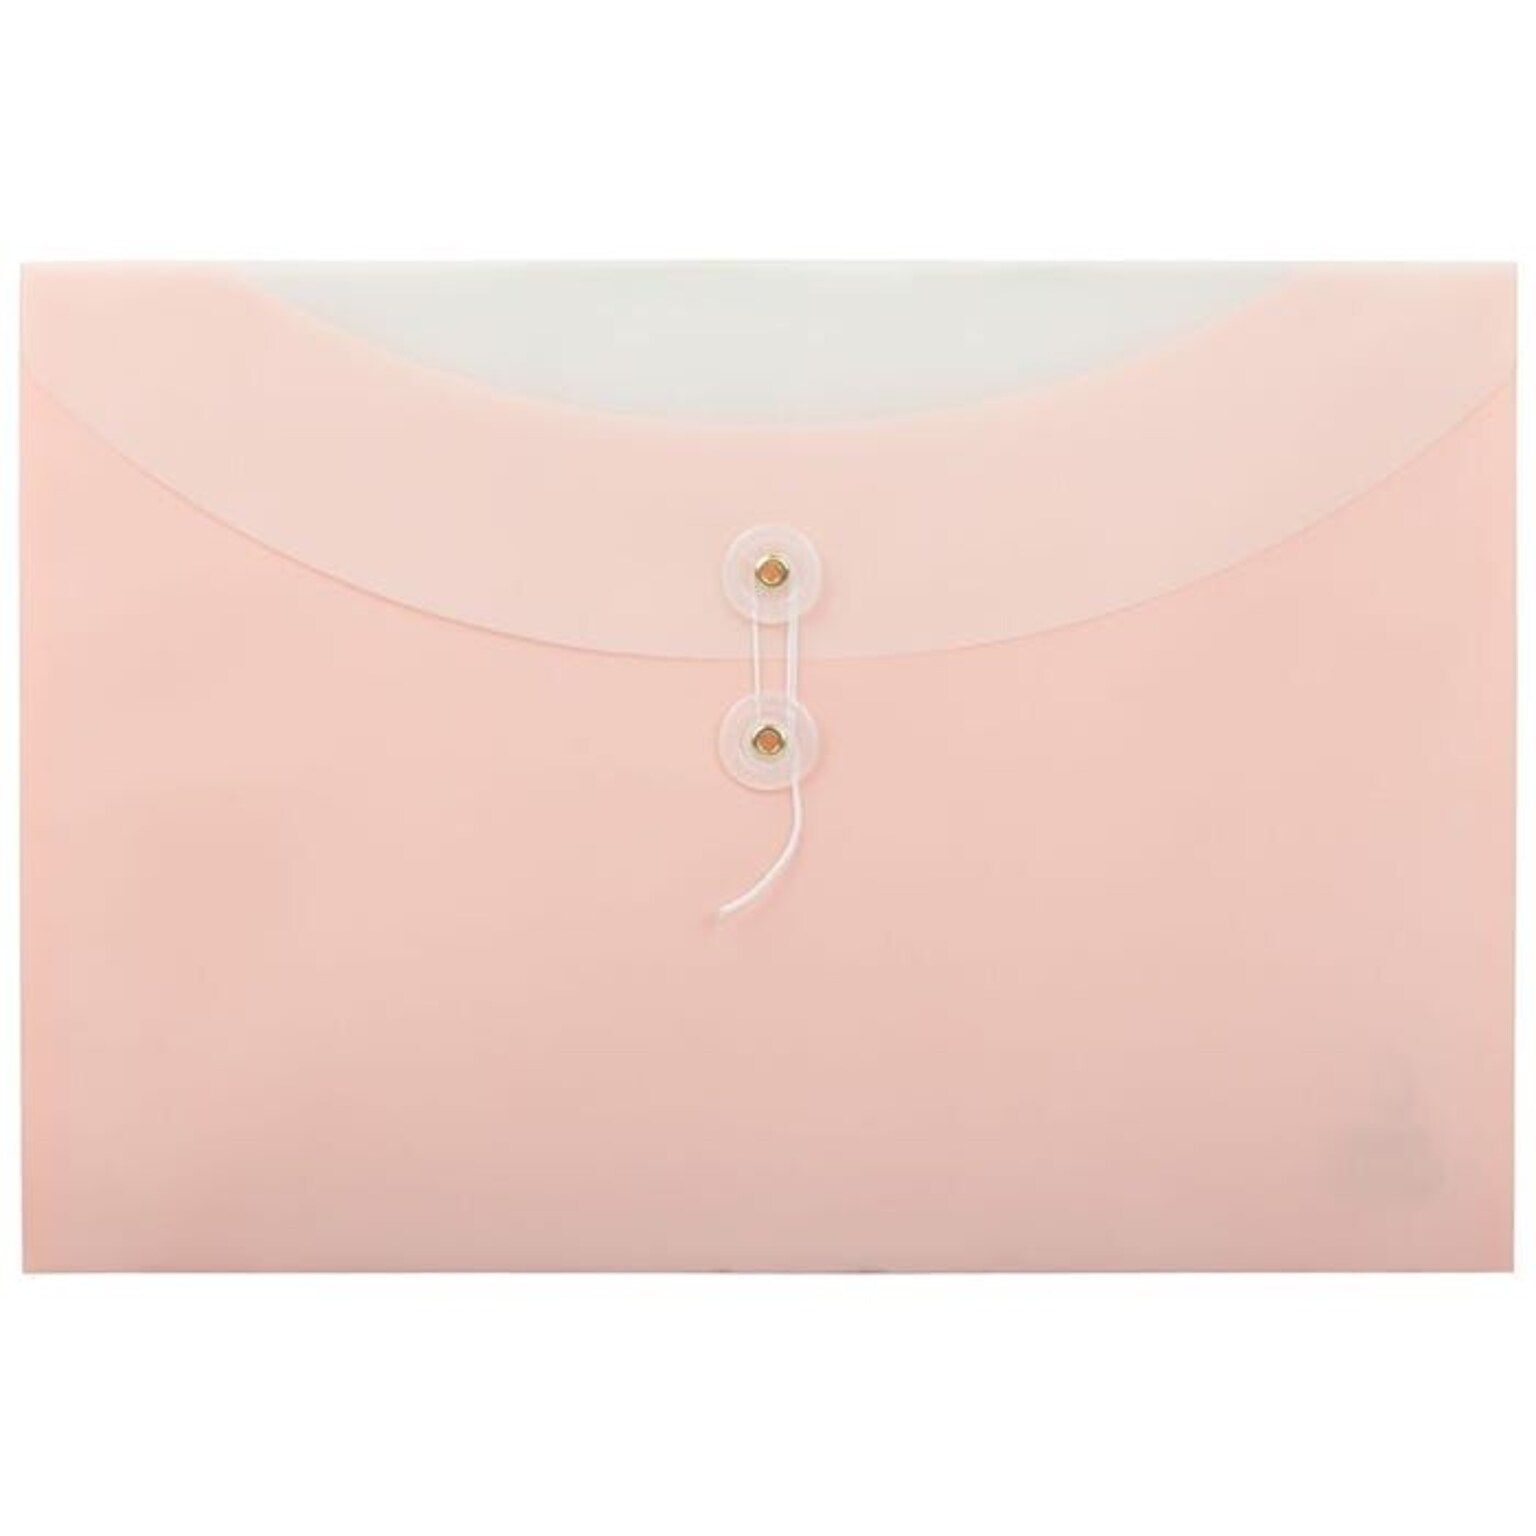 JAM PAPER Plastic Envelopes with Button & String Tie Closure, Letter Booklet, 9 1/8 x 13, Two-Tone Light Pink, 12/Pack (1271581)